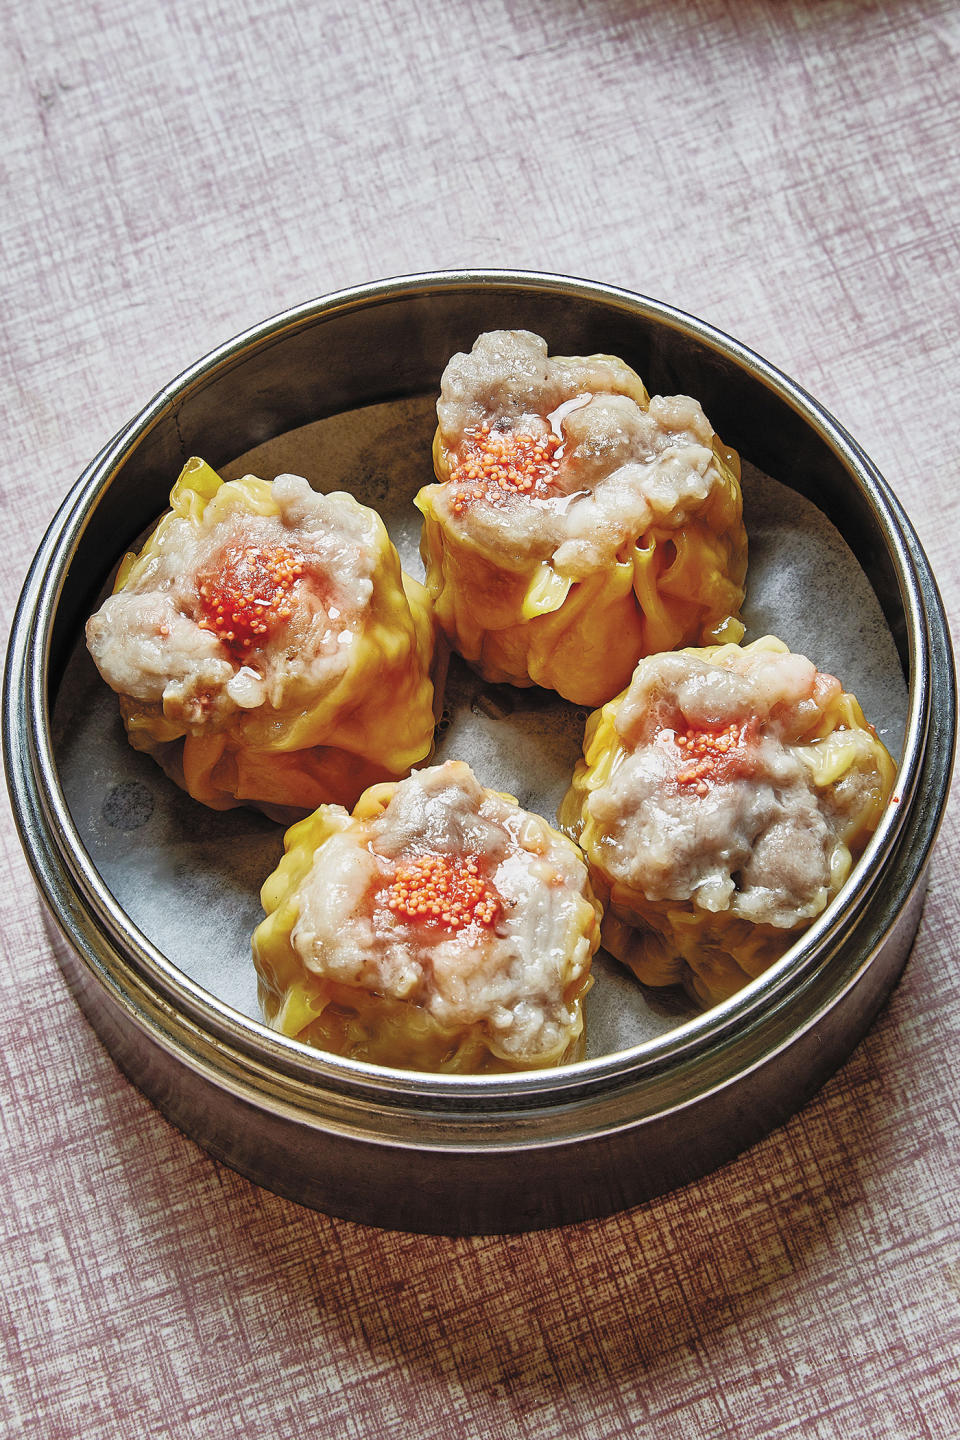 This image released by Ecco shows a dumpling recipe siu mai, featured in “The Nom Wah Cookbook: Recipes and Stories from 100 Years at New York City's Iconic Dim Sum Restaurant," by Wilson Tang. (Alex Lau/Ecco via AP)